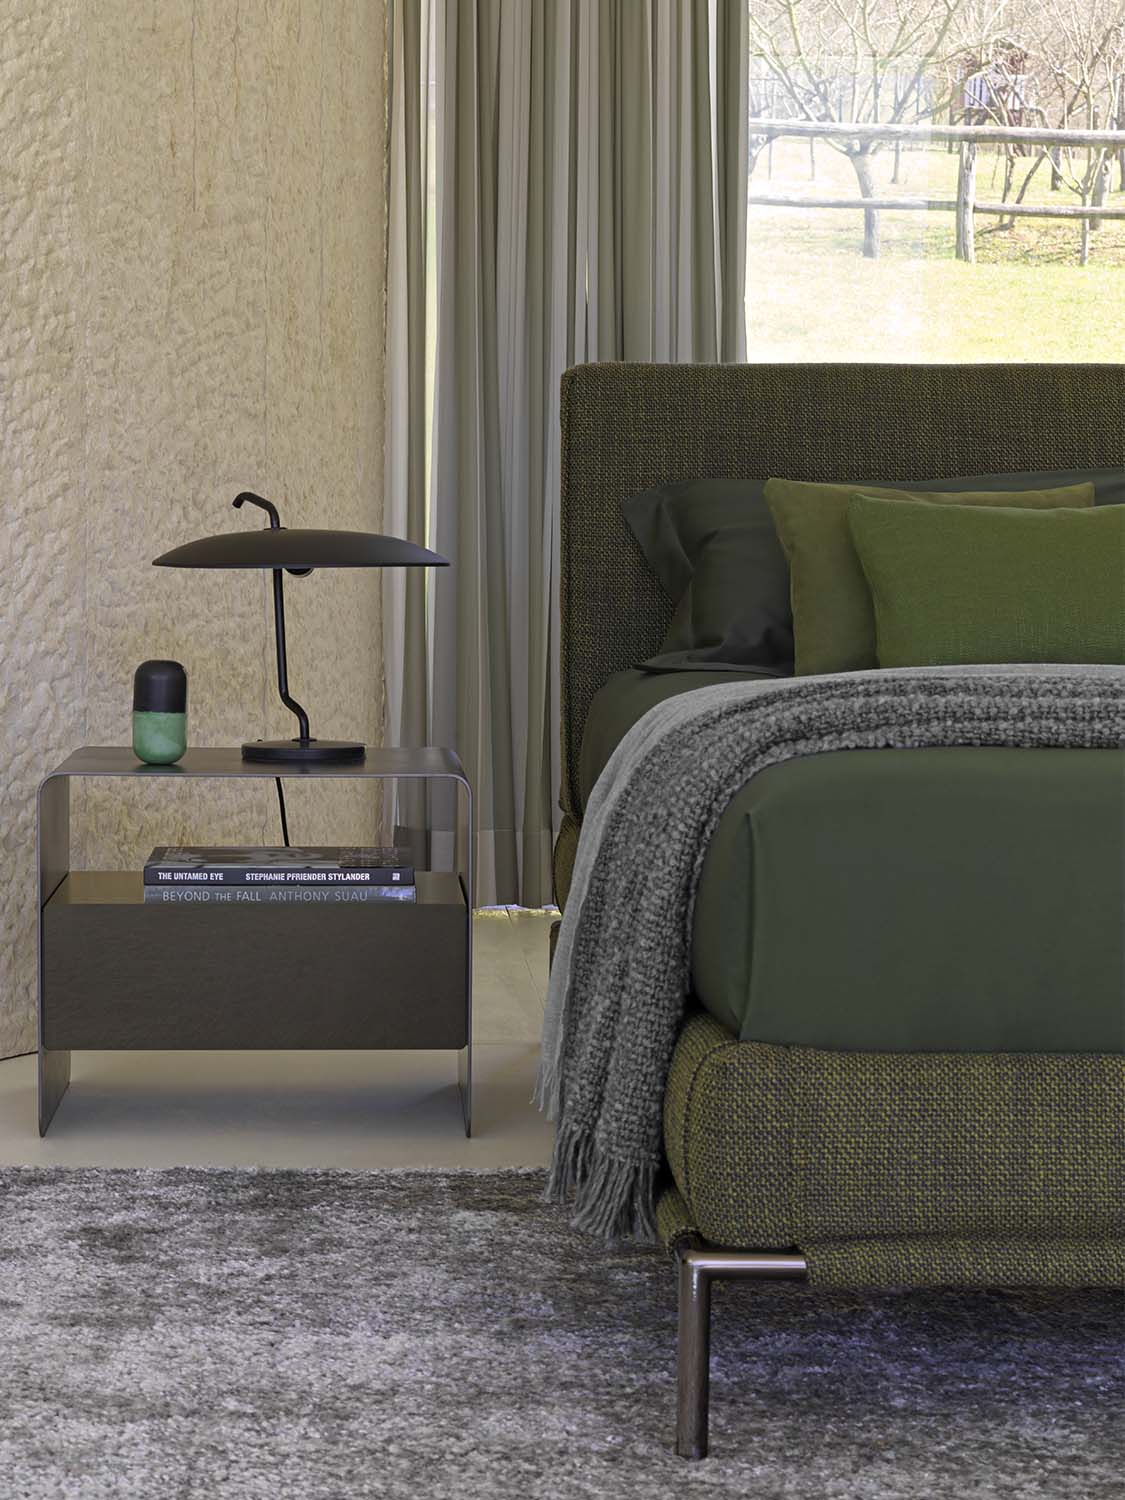 The art of furnishing: this photo shows the Icon design bed by Flou, sold by Peverelli in Como and Lugano